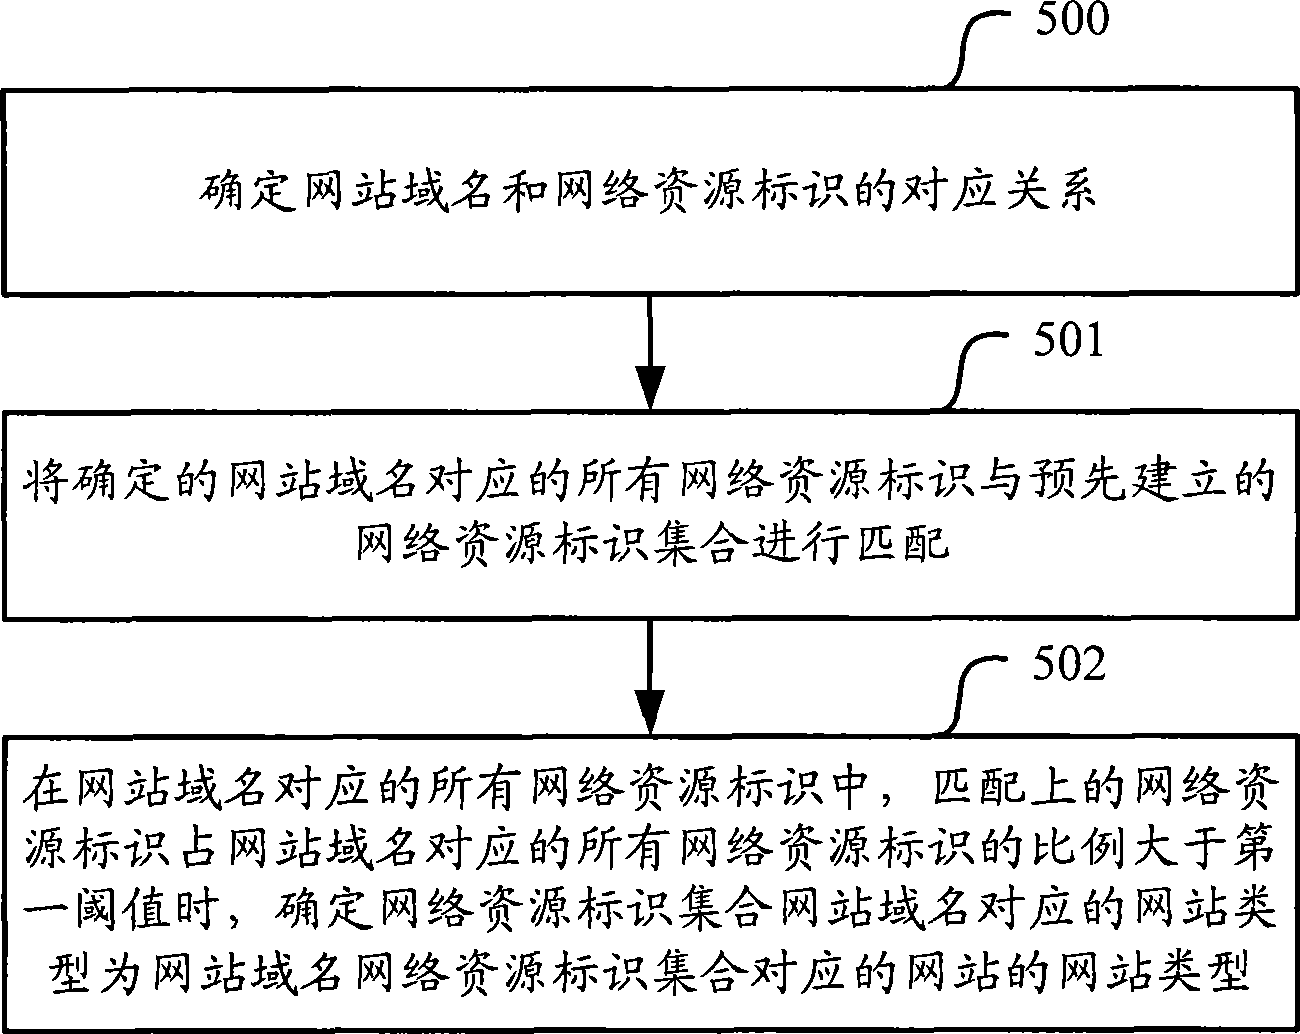 Method and apparatus for confirming website type